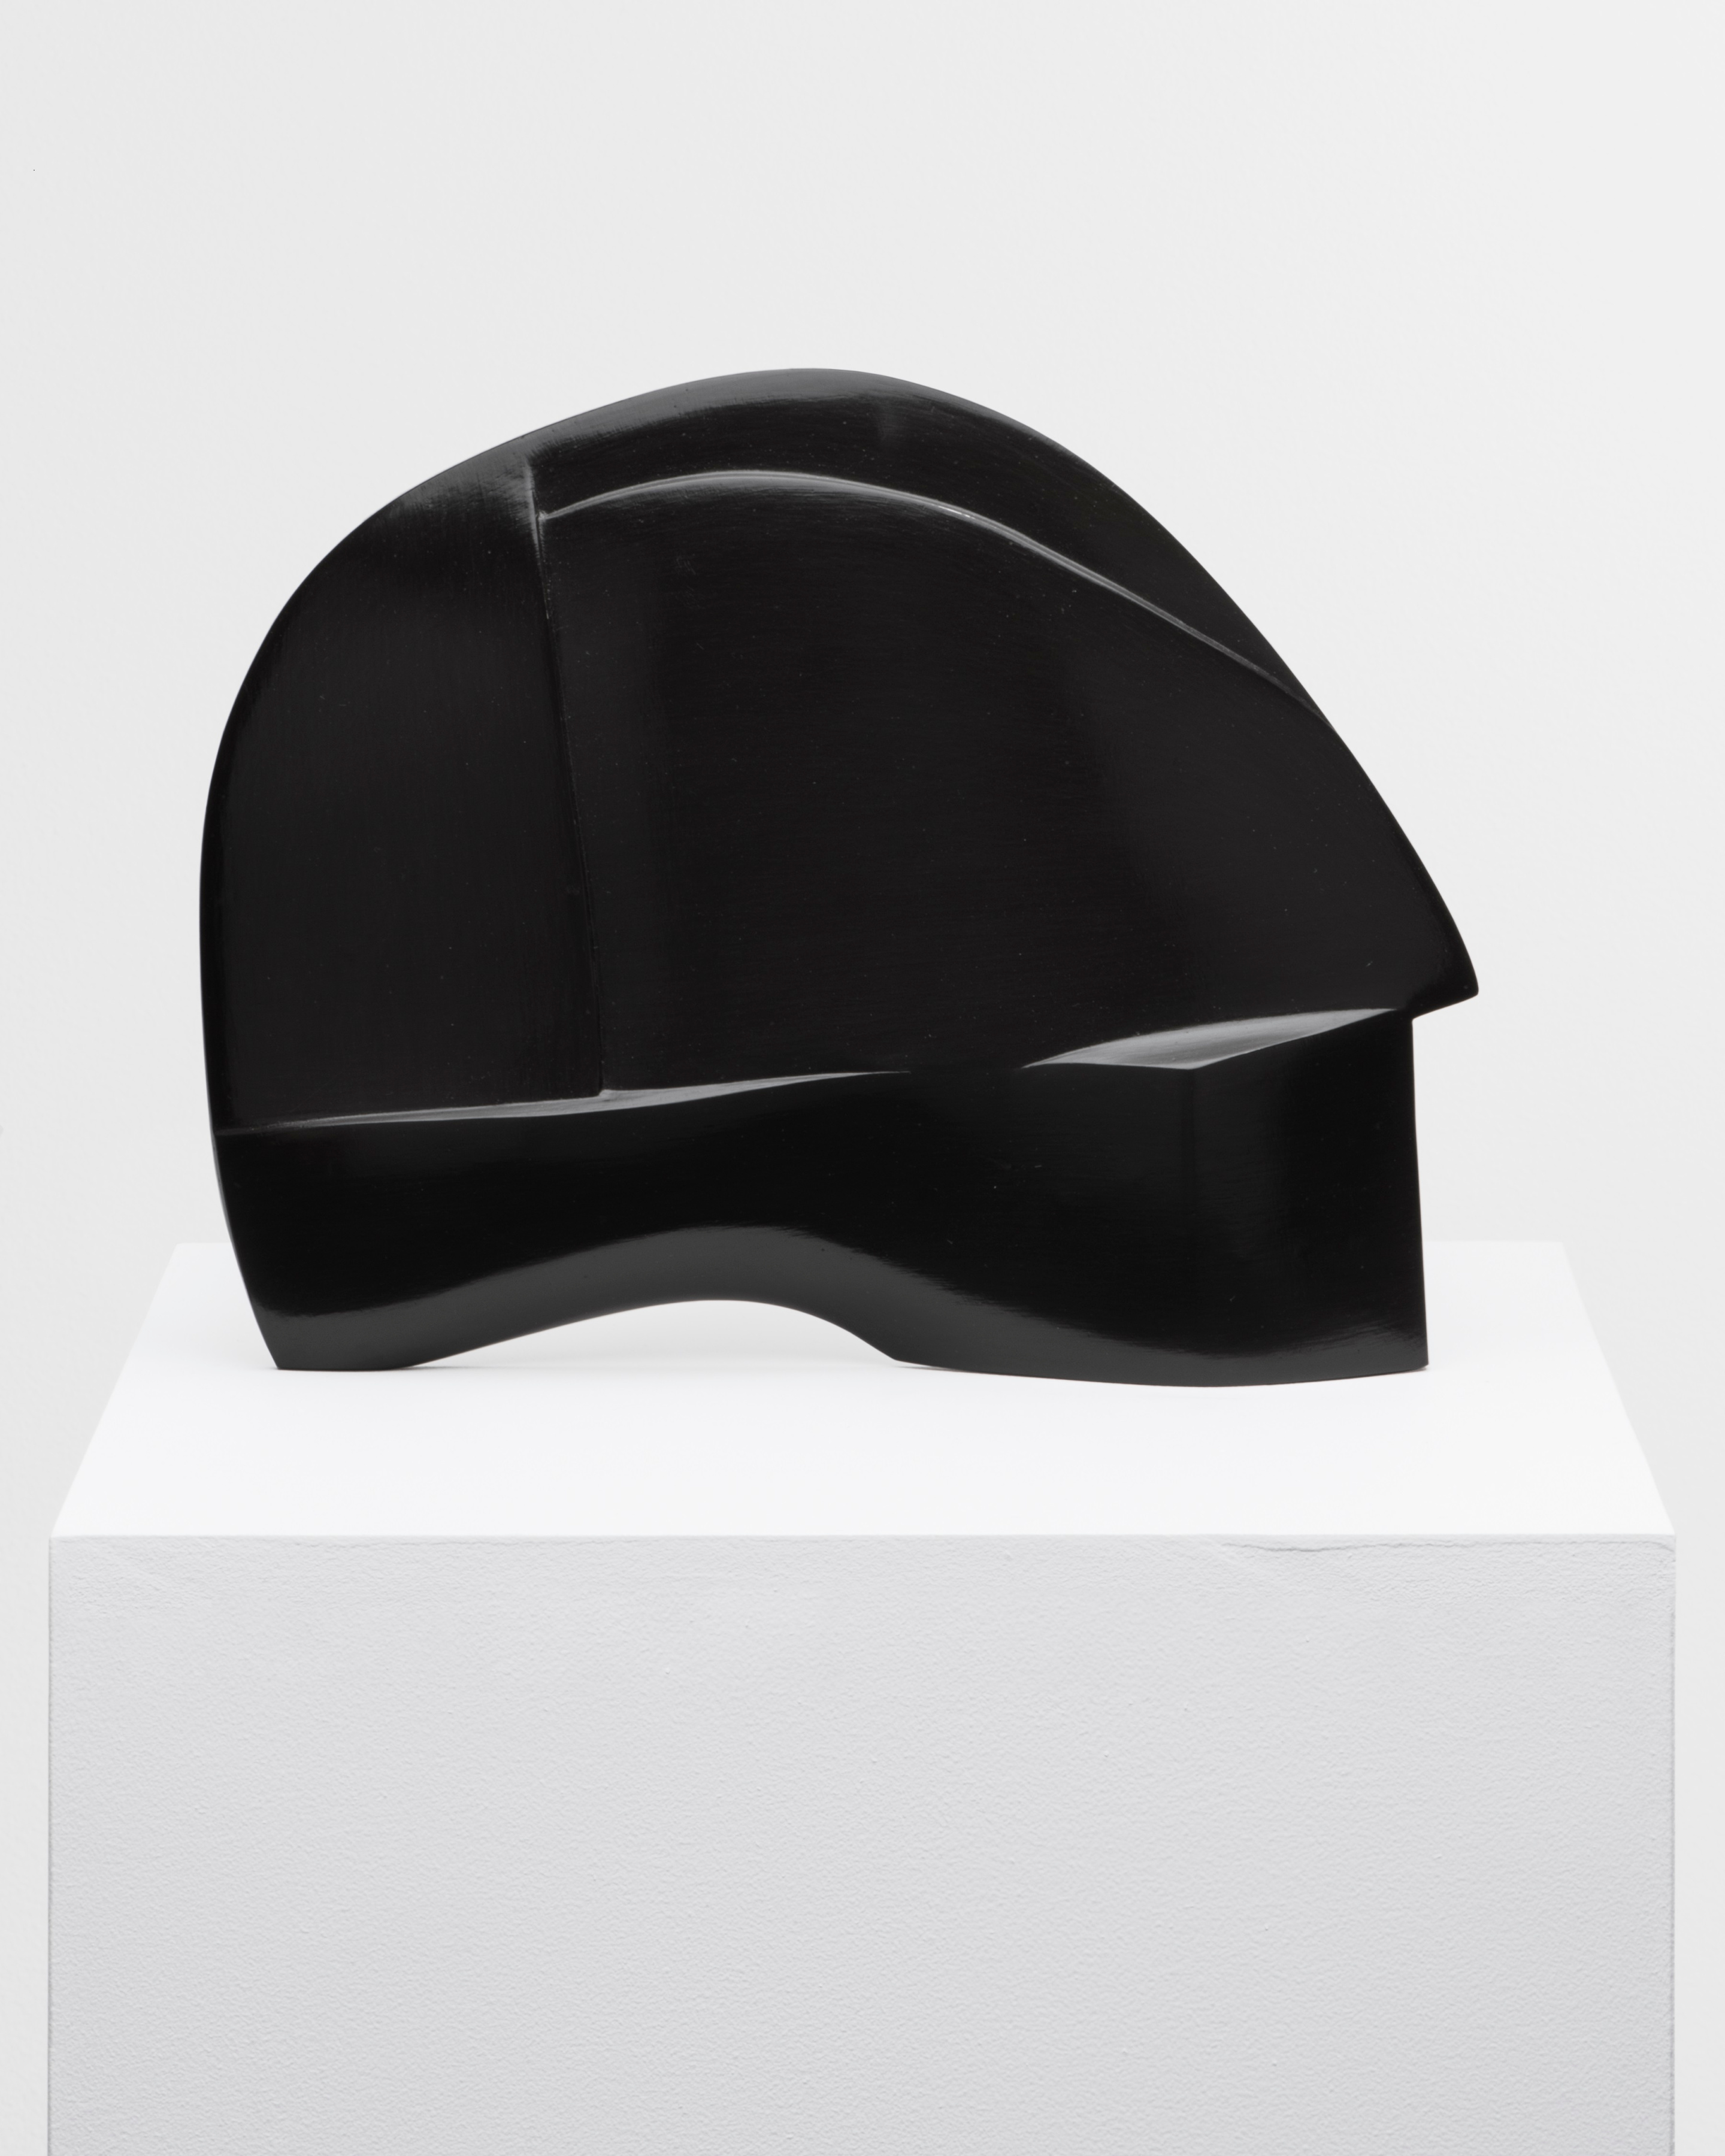 abstract black sculpture